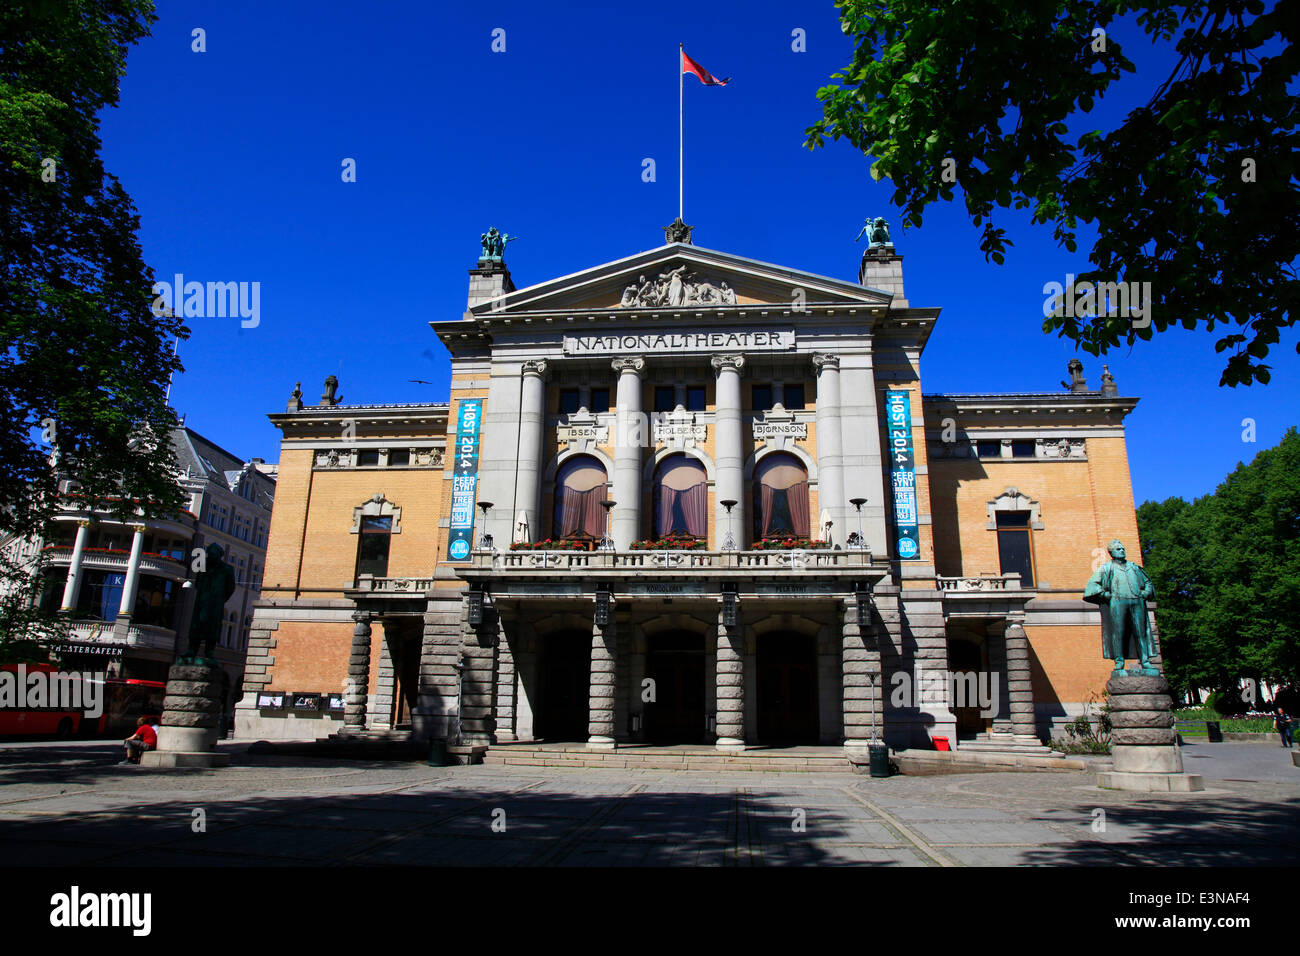 The National Theatre of Oslo was built in the year 1899, is one of the largest and most famous theater in Norway. Photo: Klaus Nowottnick Date: May 29, 2014 Stock Photo